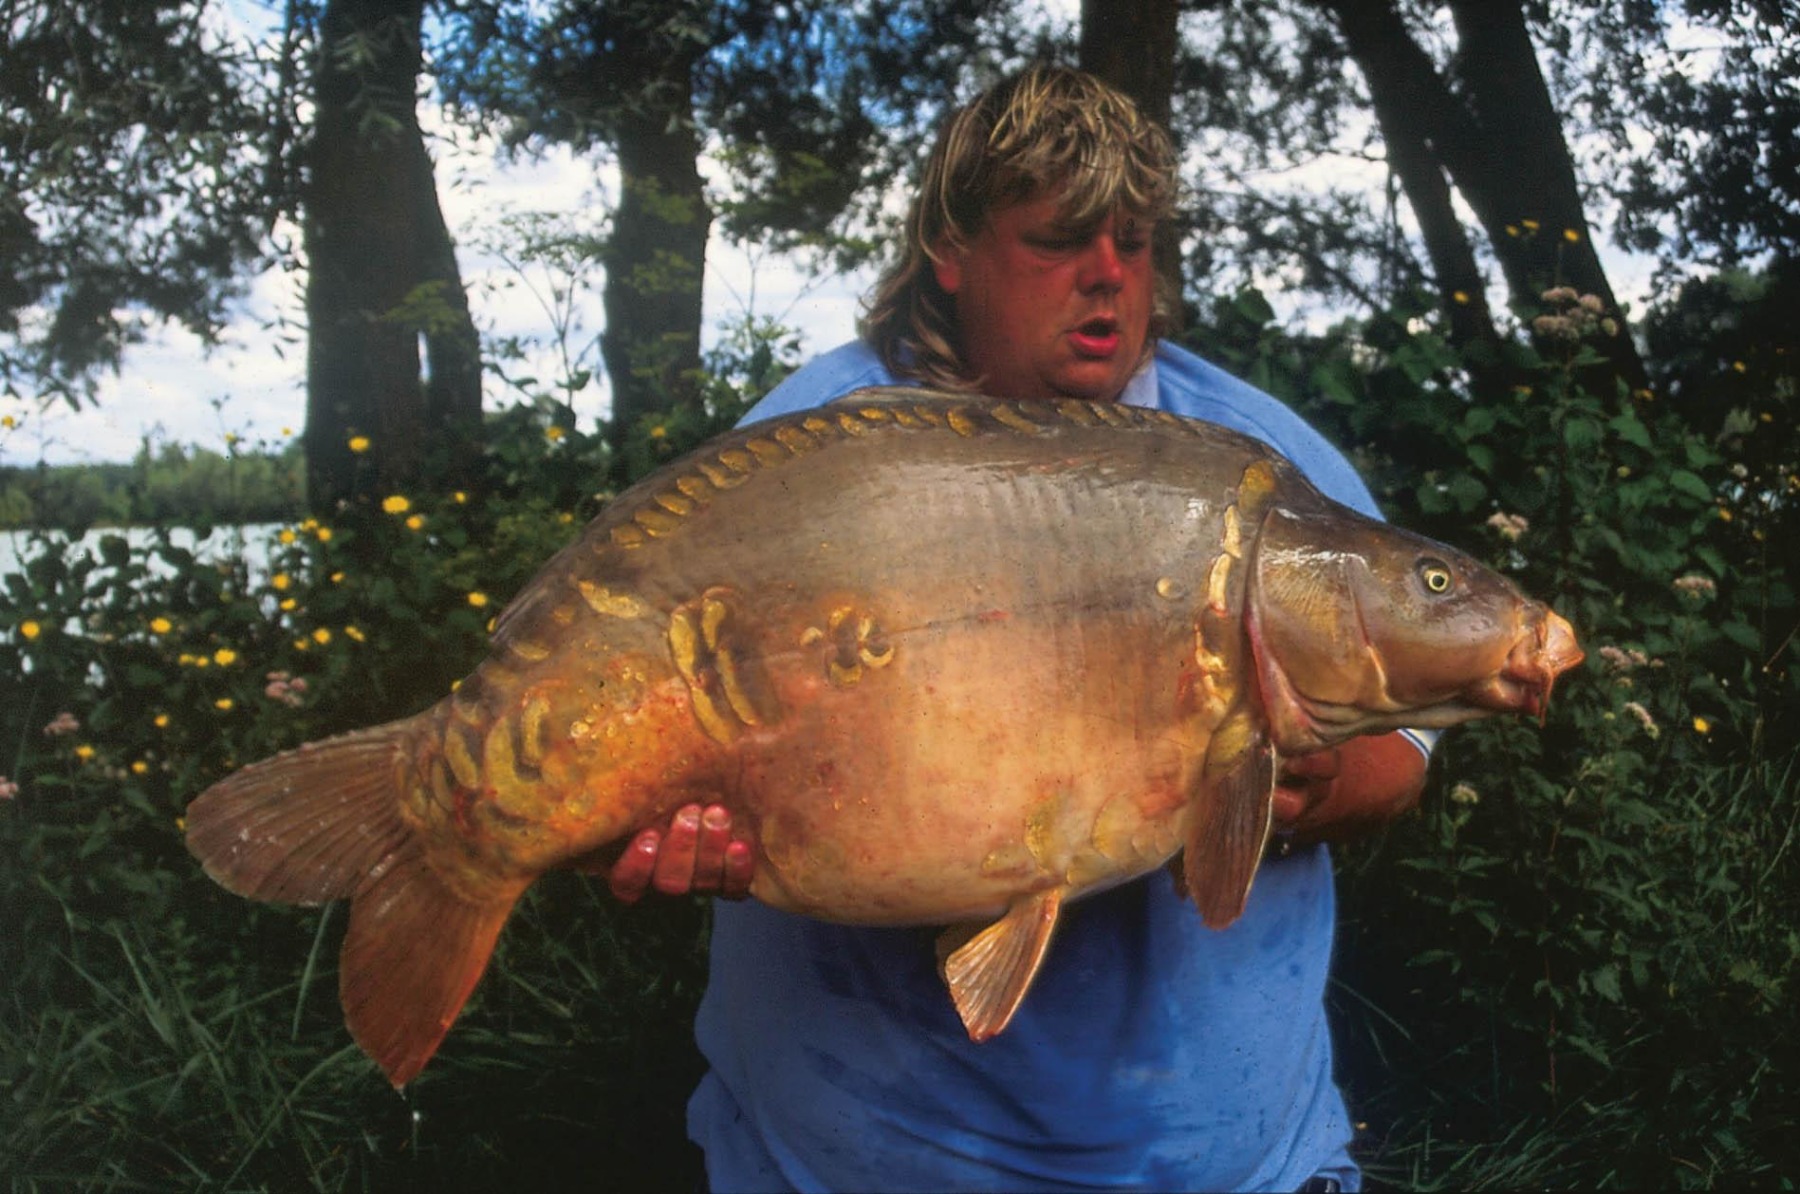 A mega overseas lump, but I did plenty of research on the lake 